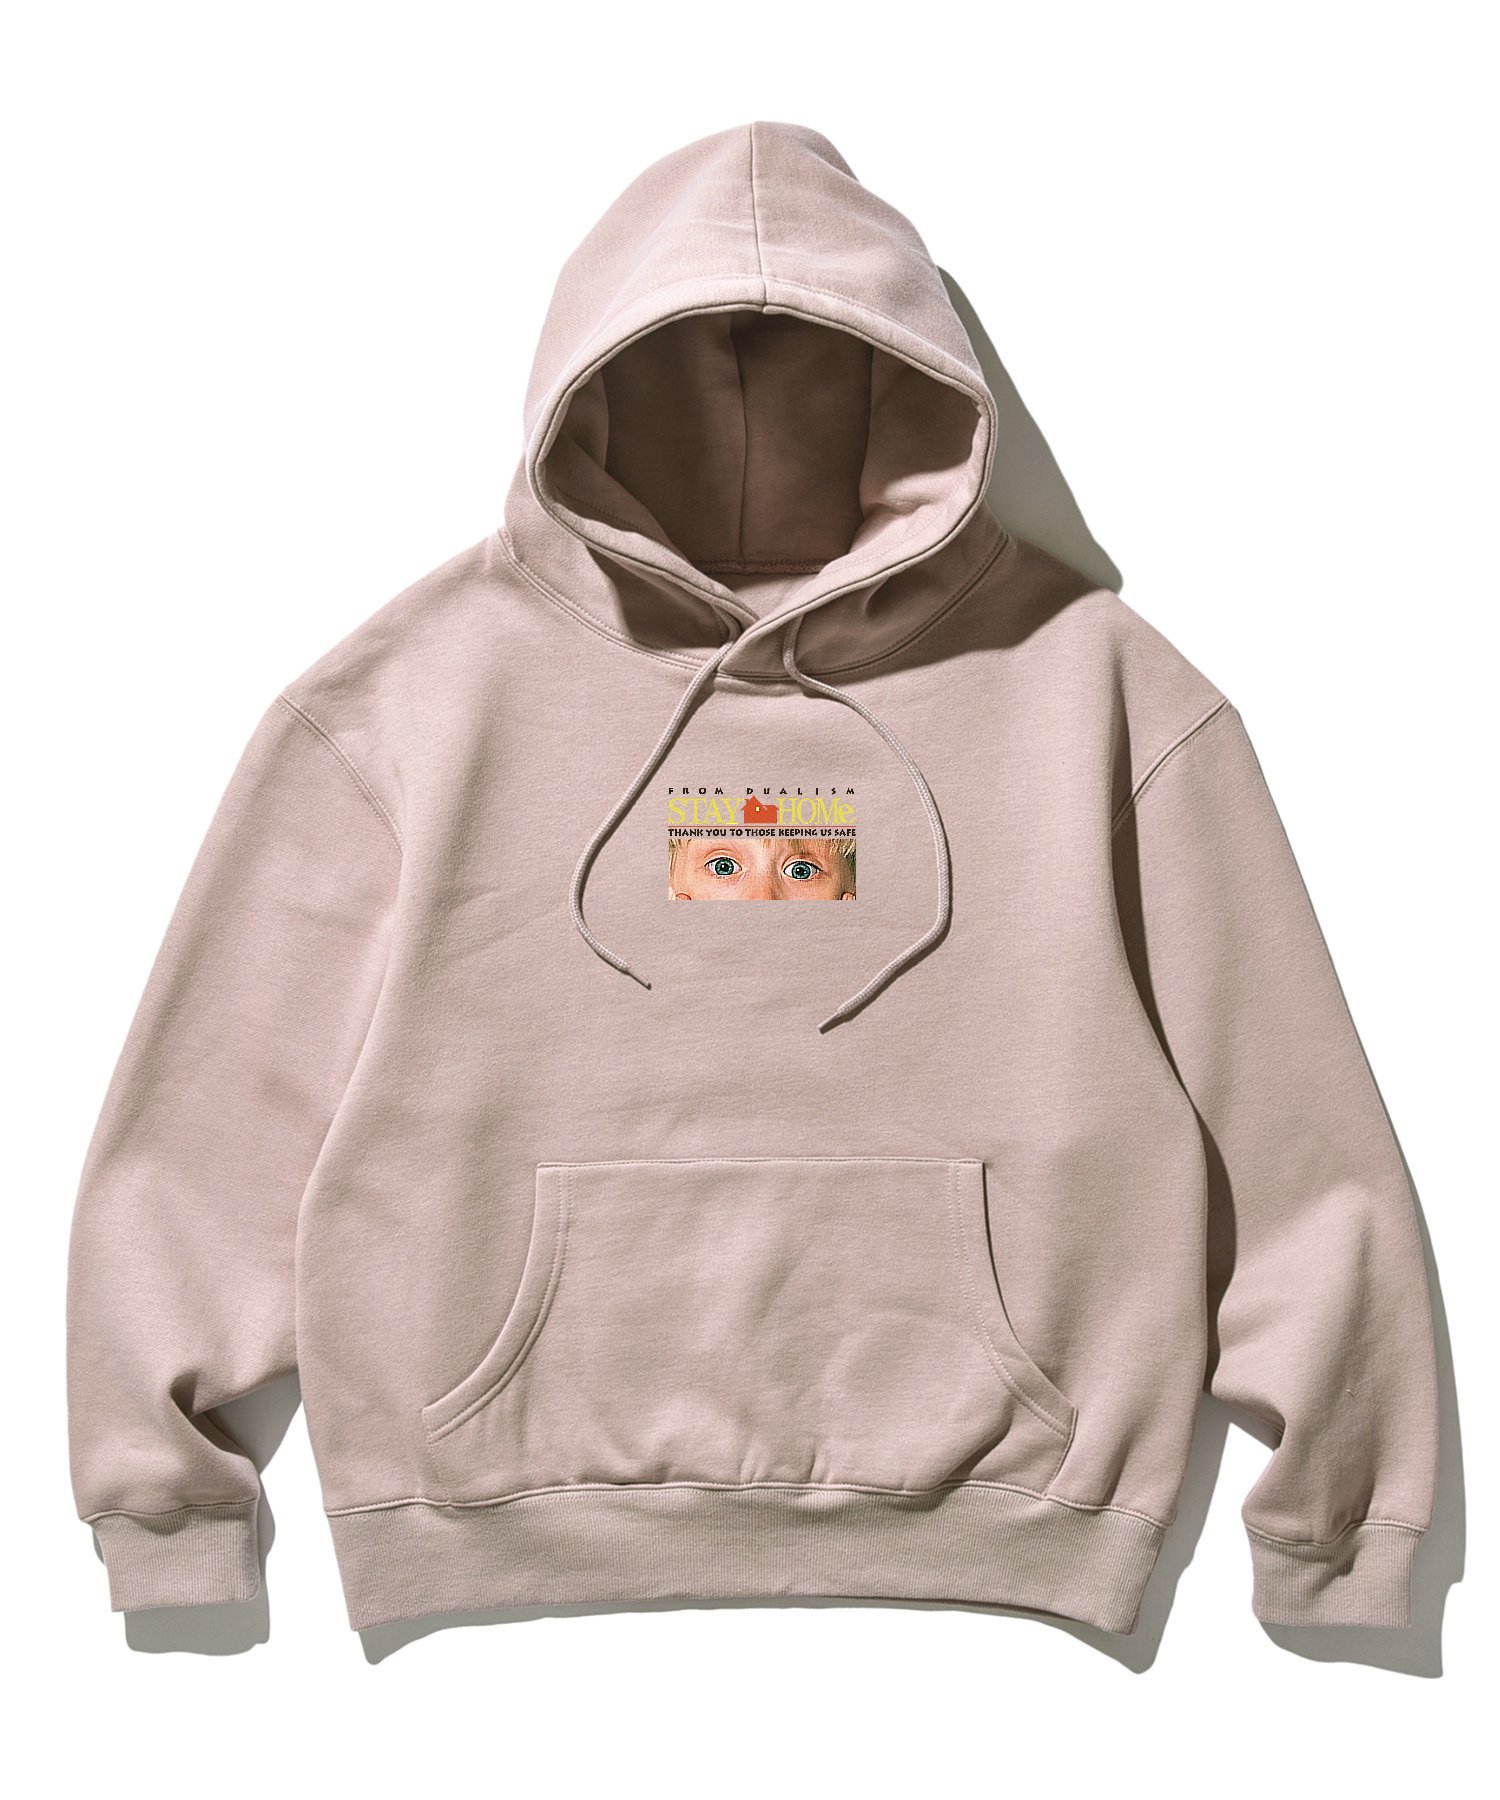 【DUALISM】STAY HOME HOODIE パーカー【デュアリズム】